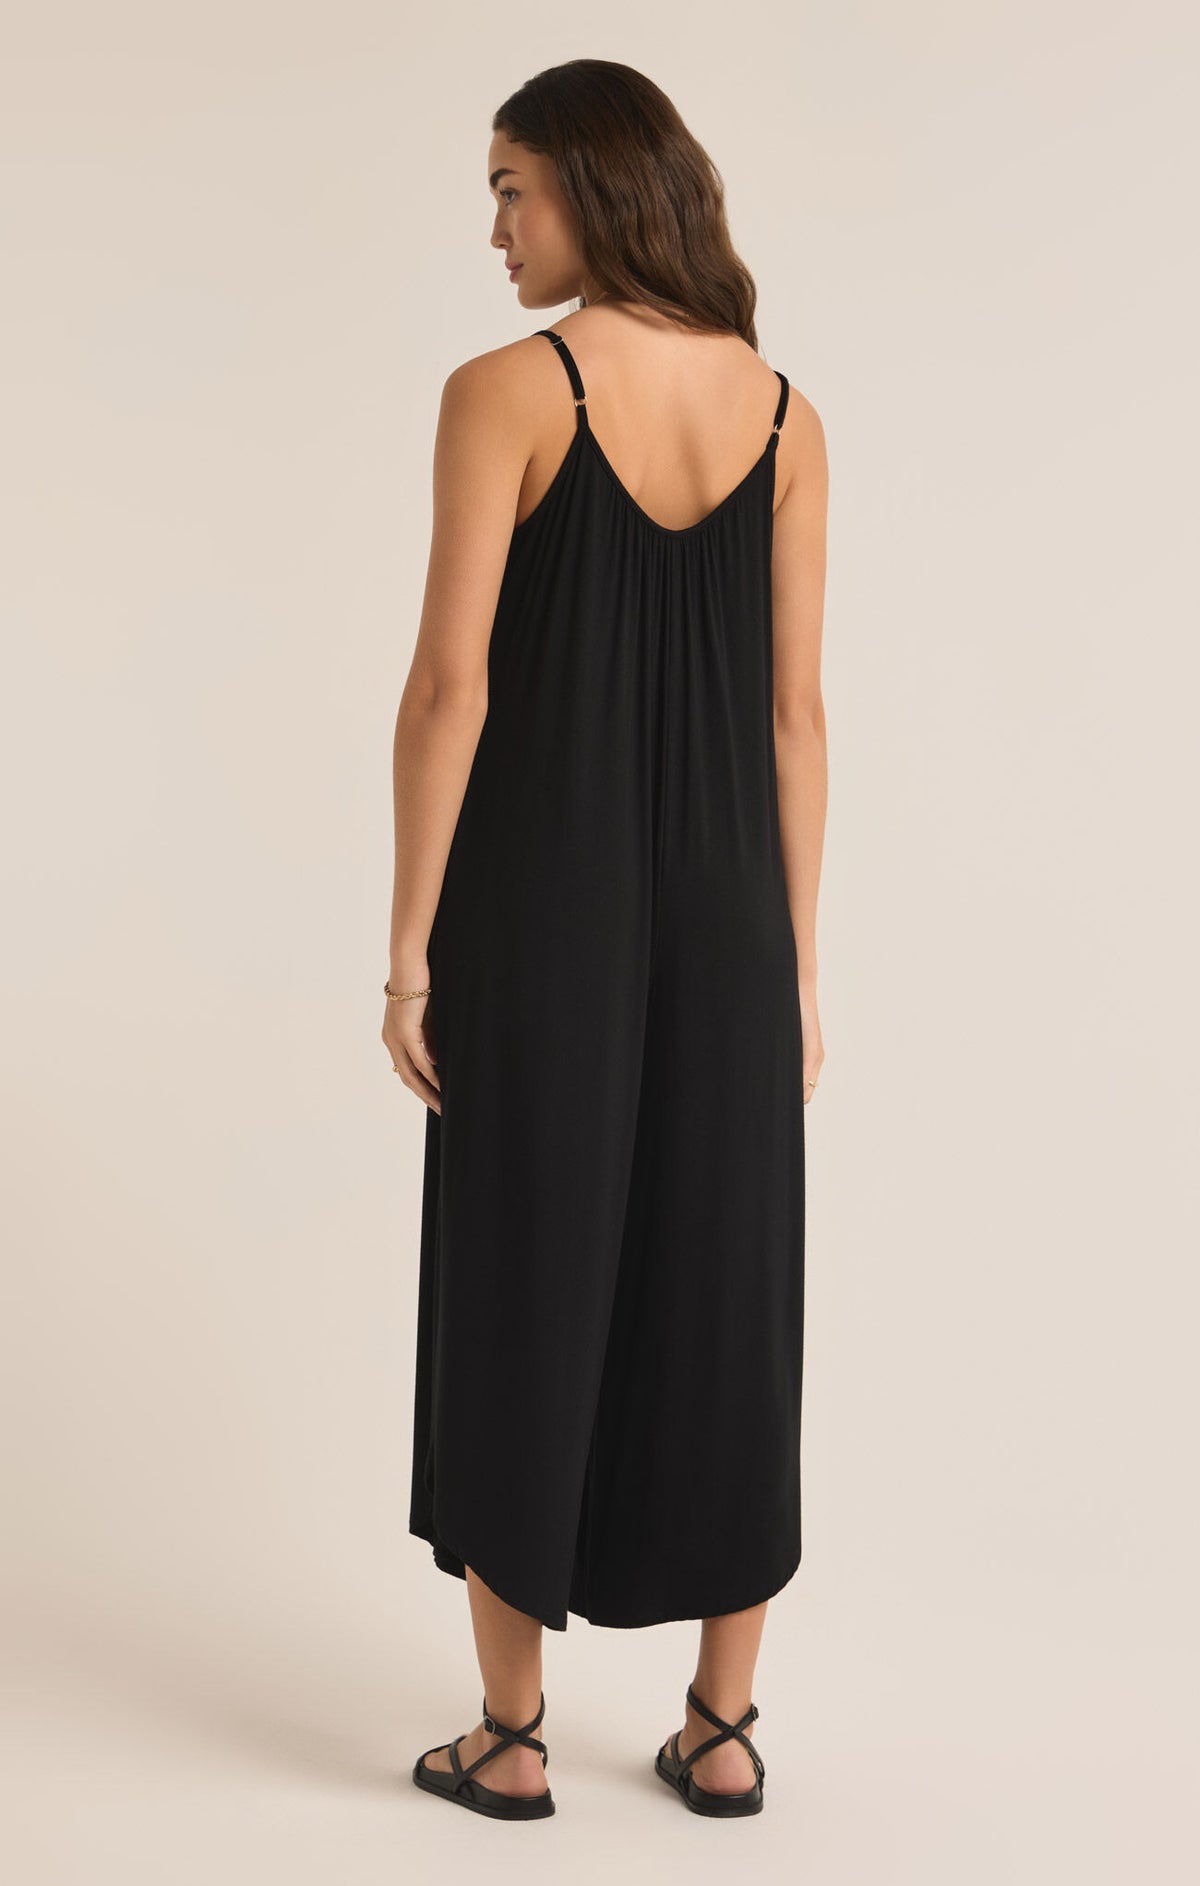 The Flared Jumpsuit in Black